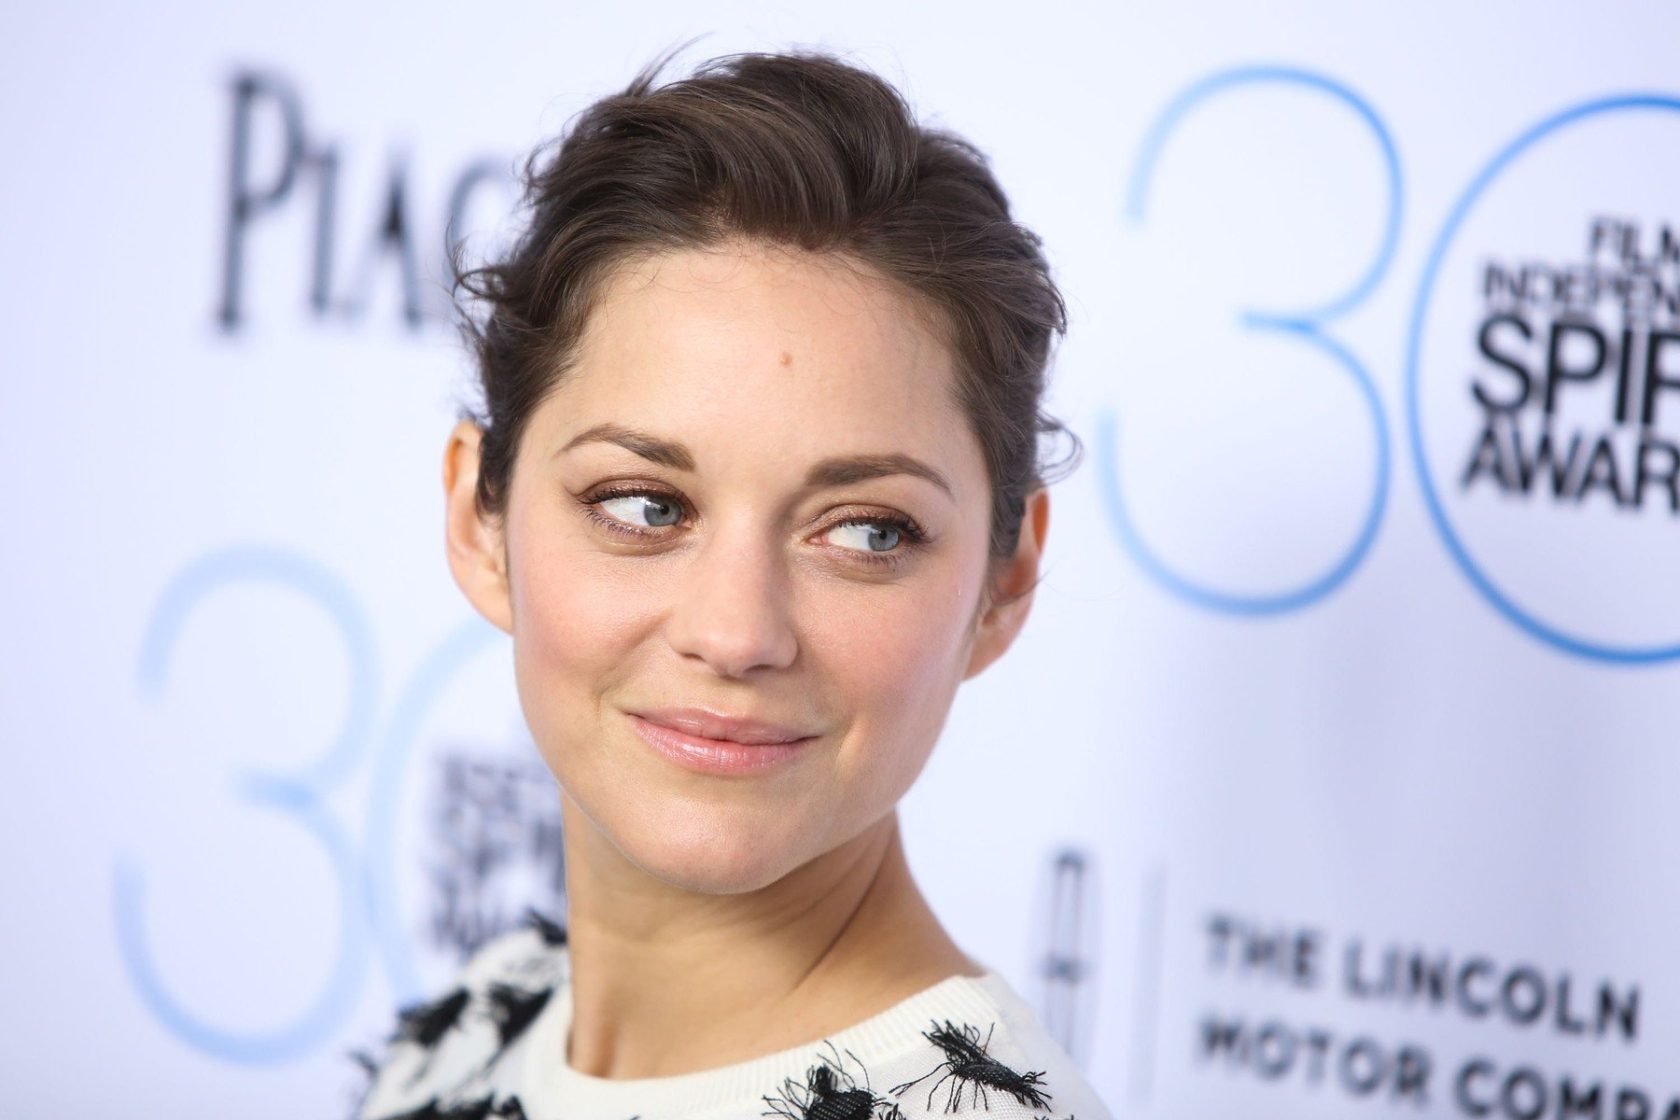 Marion Cotillard at arrivals for 2015 Film Independent Spirit Awards Nominee Brunch, BOA Steakhouse in West Hollywood, Los Angeles, CA January 10, 2015., Image: 215011504, License: Rights-managed, Restrictions: For usage credit please use; Xavier Collin/Everett Collection, Model Release: no, Credit line: Profimedia, Everett